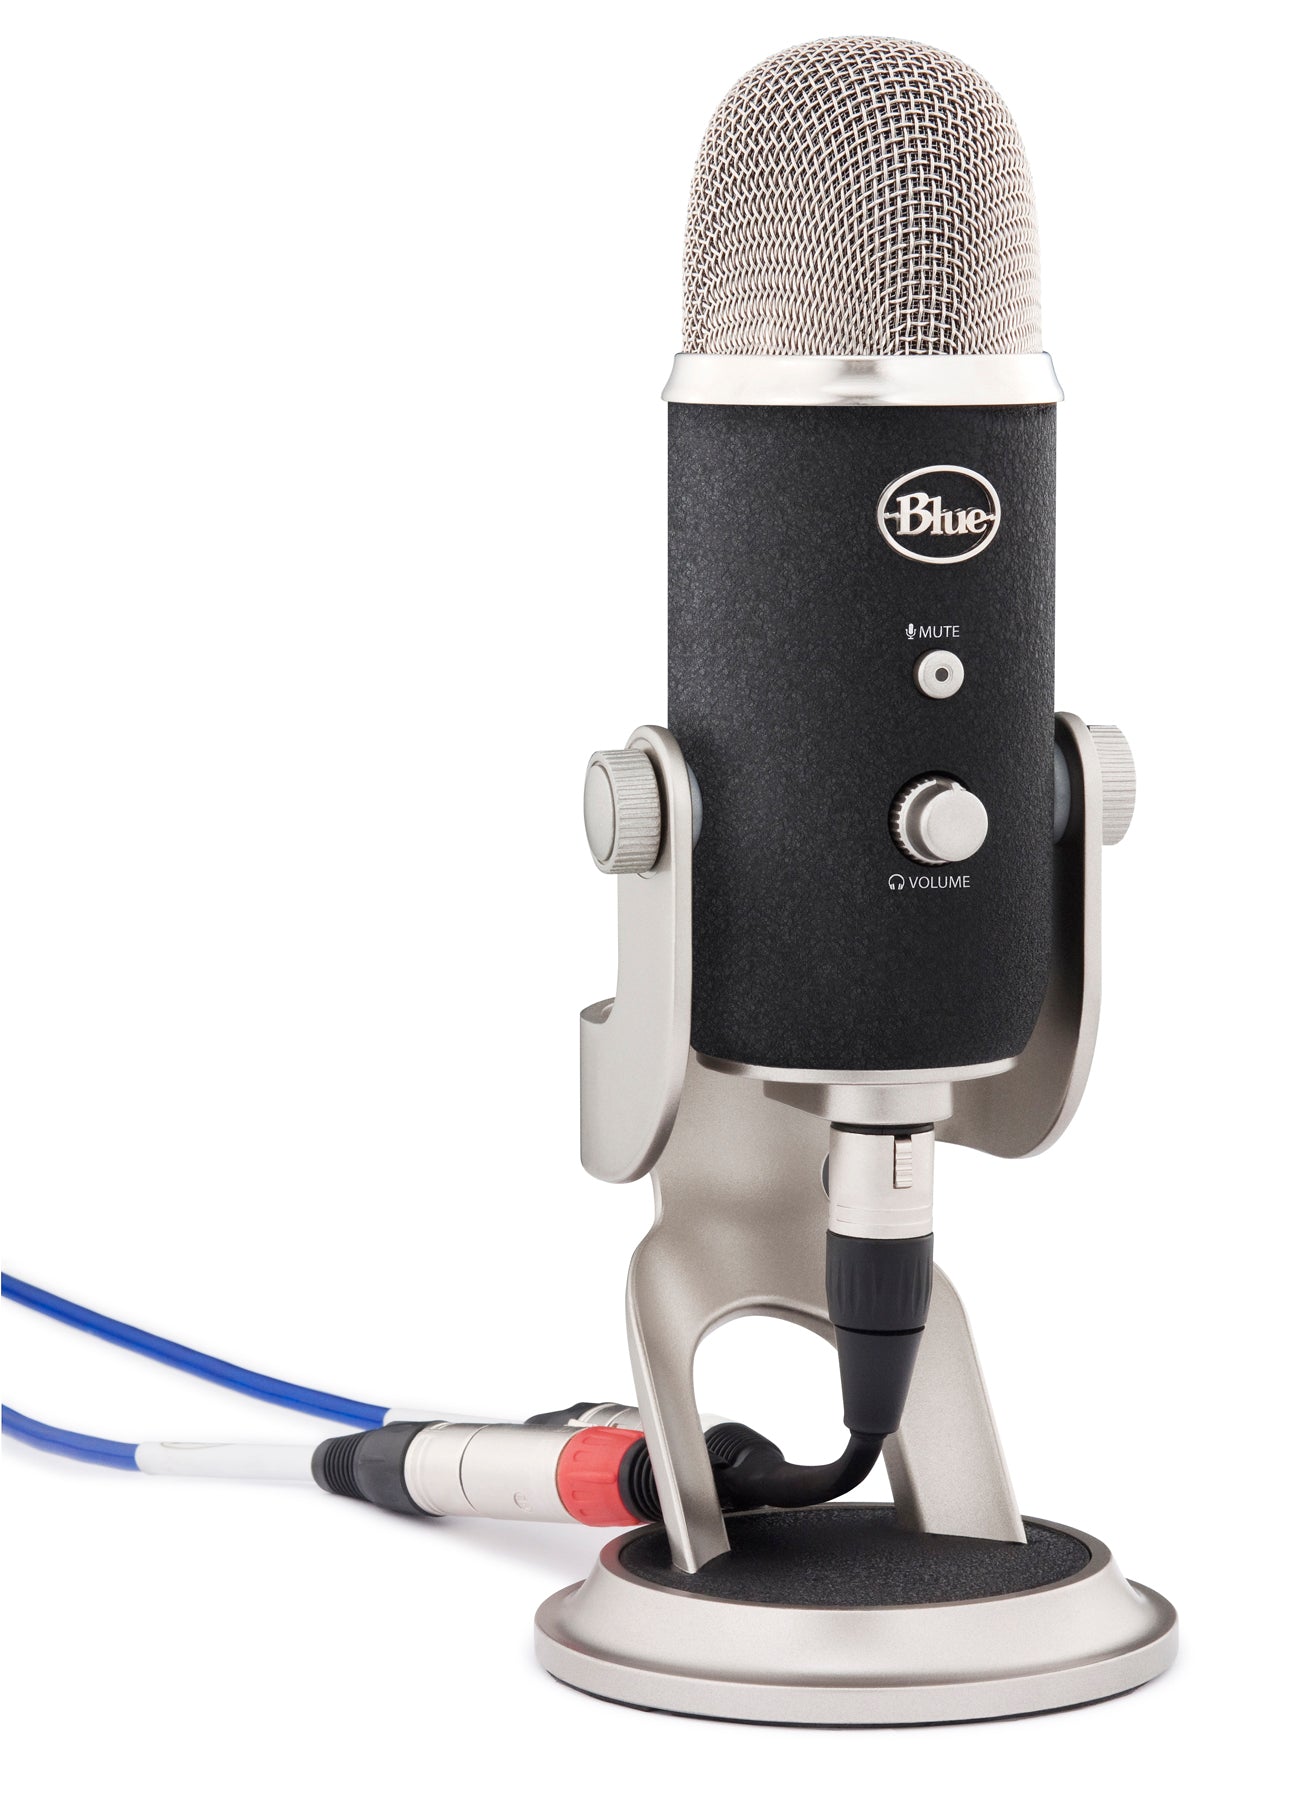 Blue Yeti Pro Microphone - Review